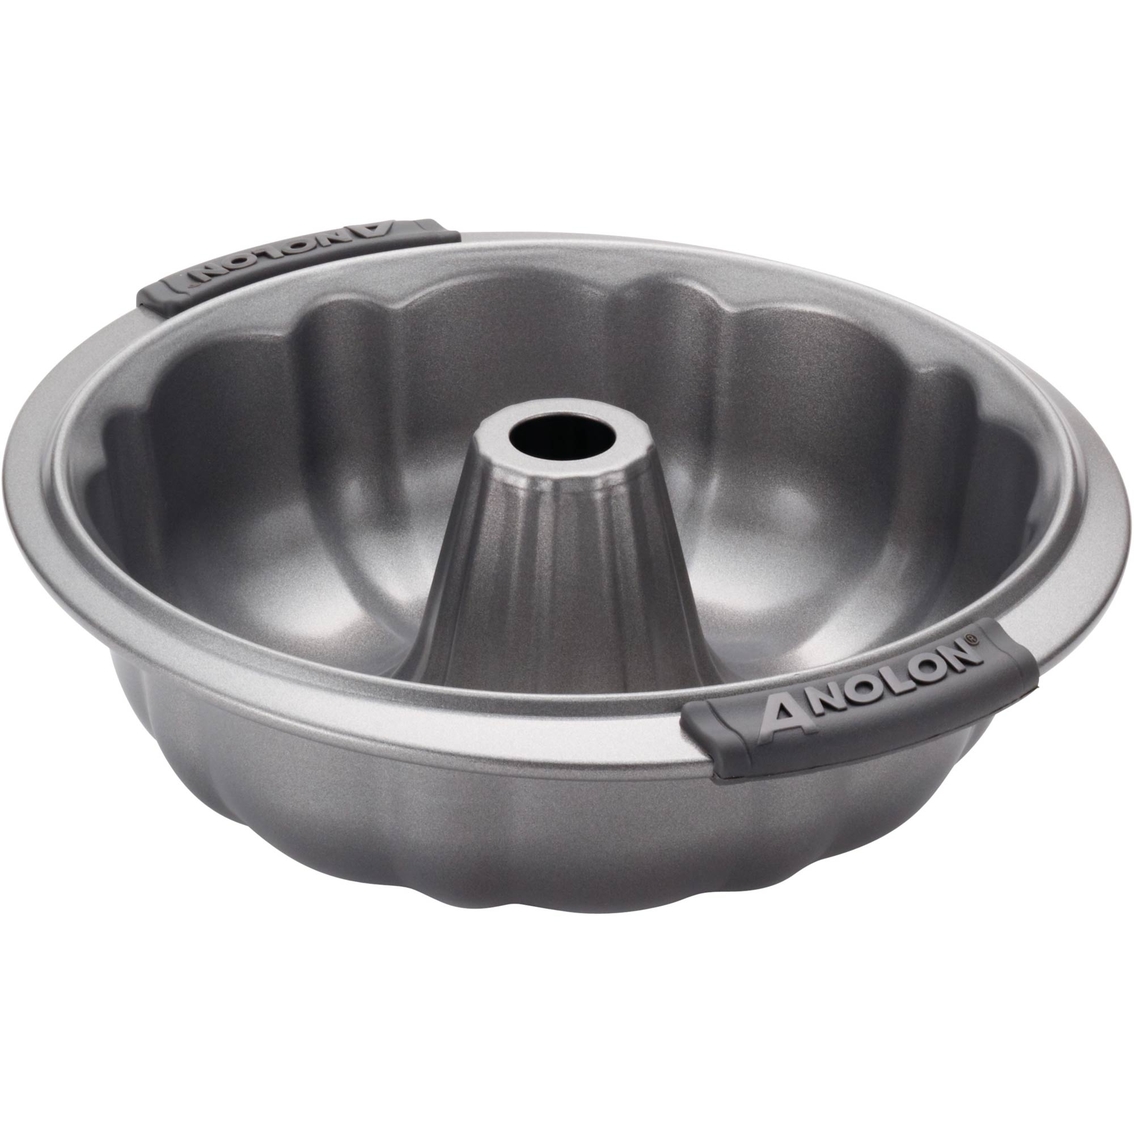 Anolon Advanced Nonstick Bakeware Silicone Grips Fluted Mold Pan - Image 2 of 4